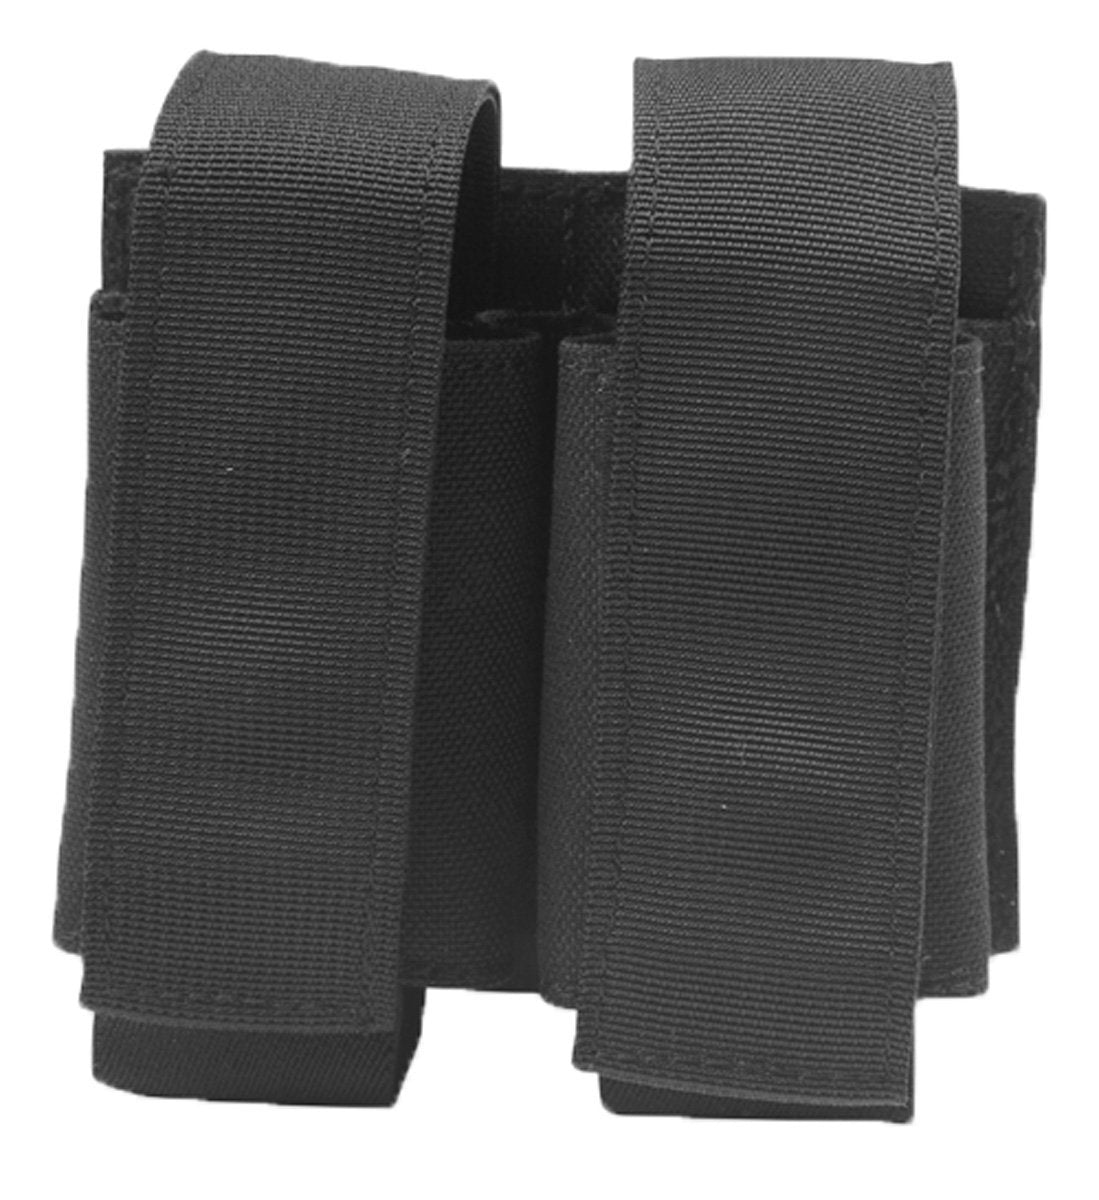 A pair of black Elite Survival Systems 1000 denier nylon ankle weights with velcro straps, isolated on a white background.